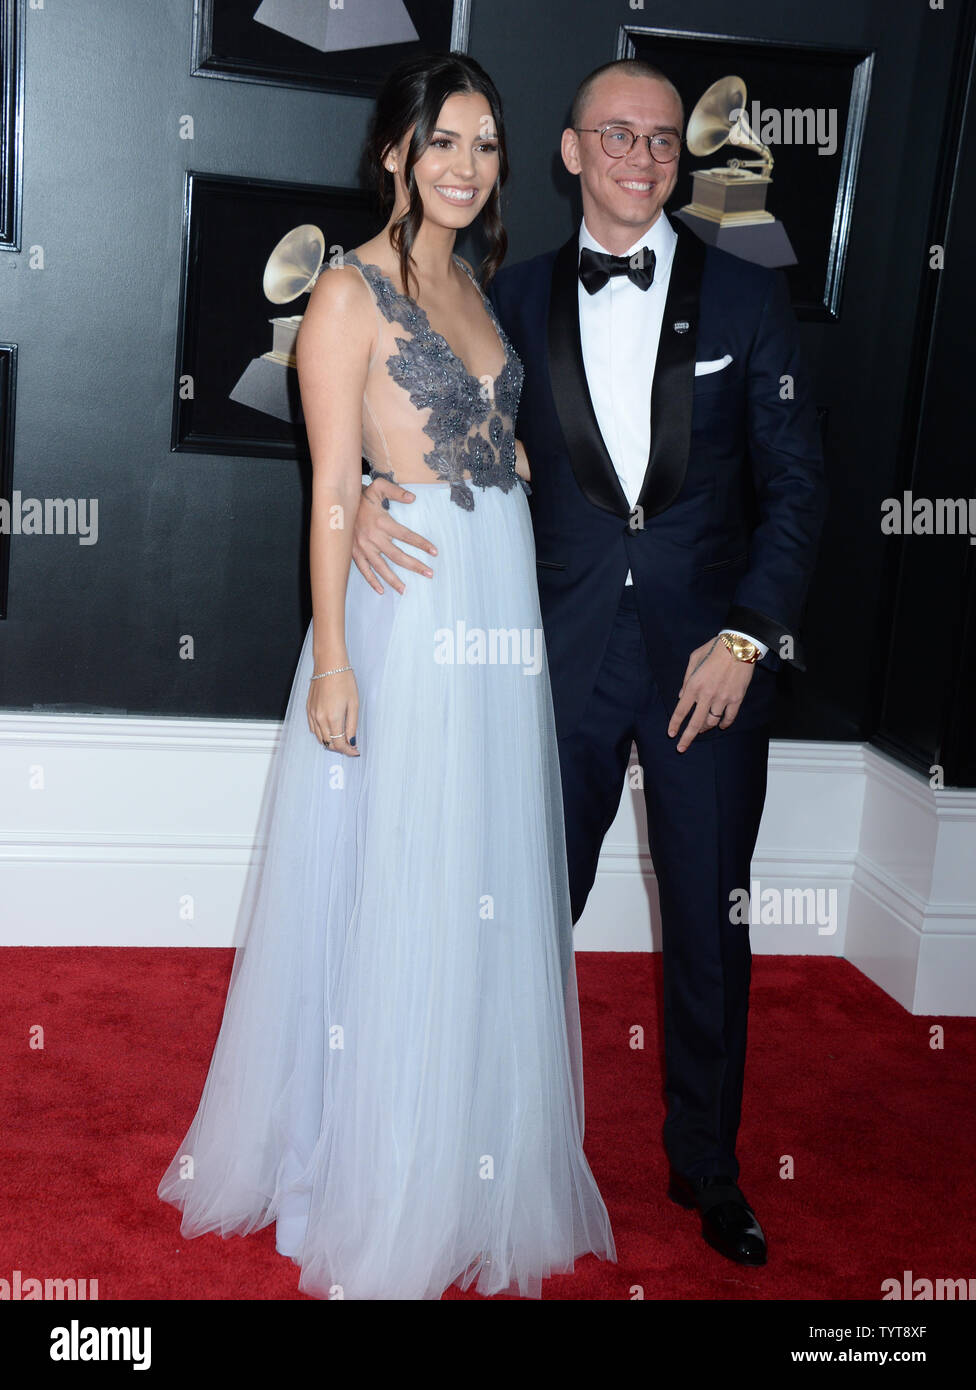 Jessica Andrea And Recording Artist Logic Arrive On The Red Carpet At The 60th Annual Grammy Awards Ceremony At Madison Square Garden In New York City On January 28 2018 The Cbs